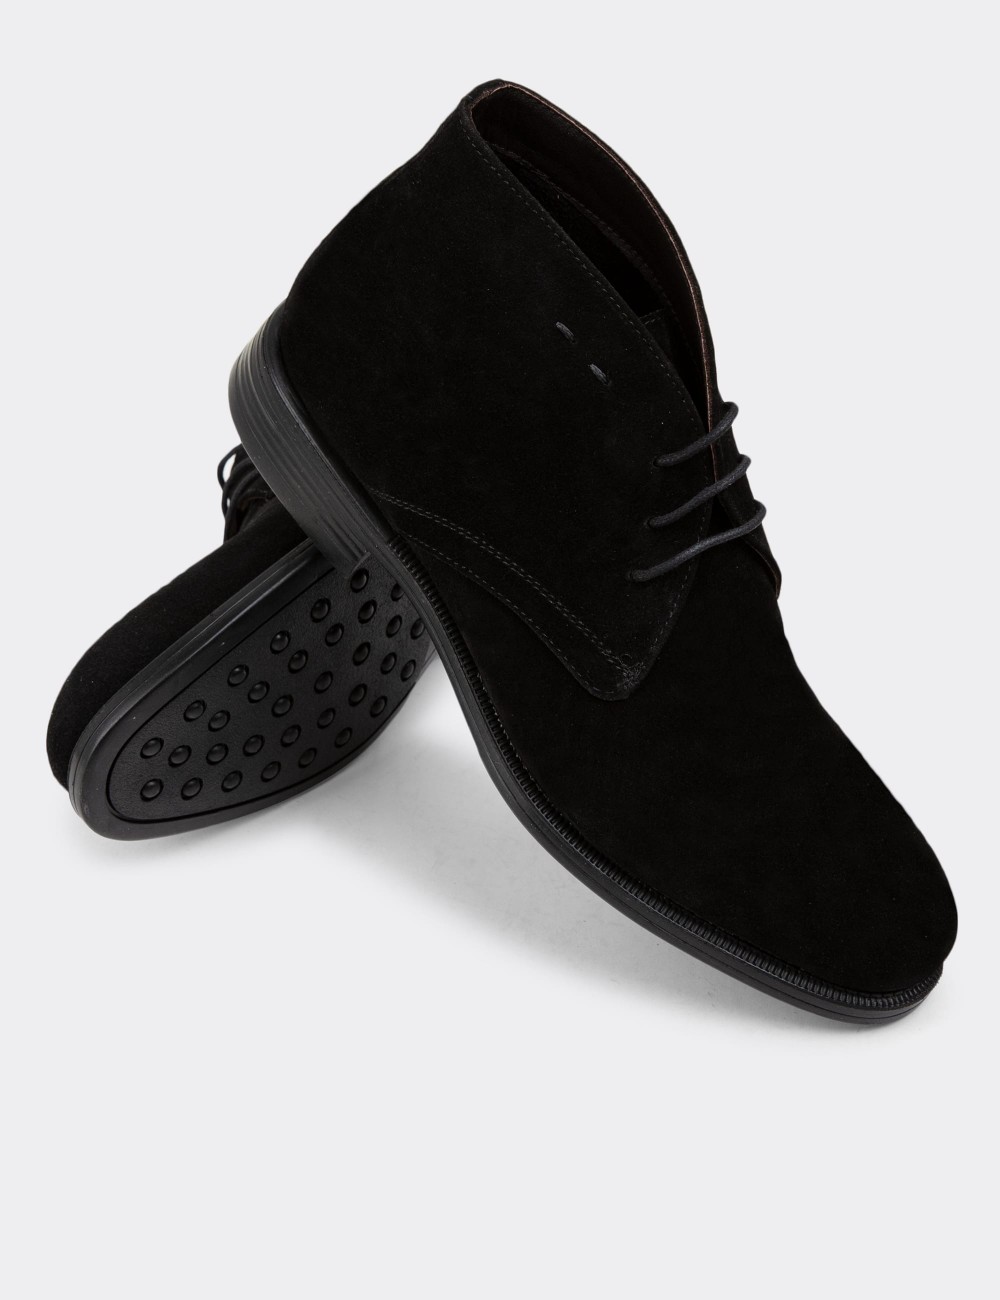 Black Suede Leather Desert Boots - 01295MSYHC13